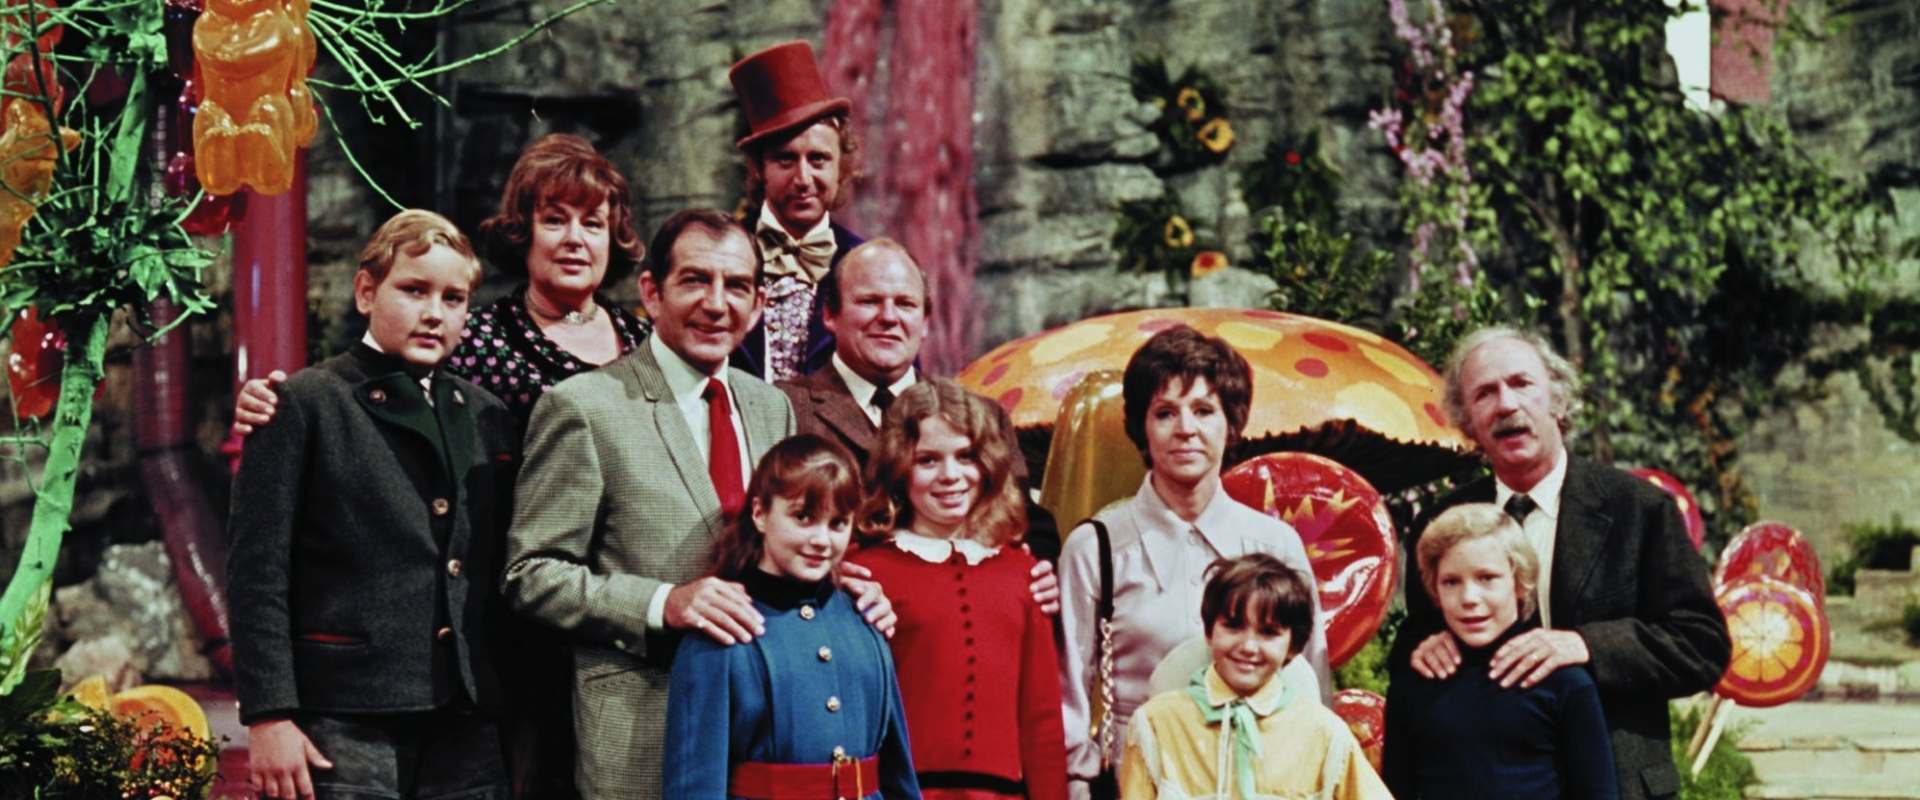 Willy Wonka & the Chocolate Factory background 2